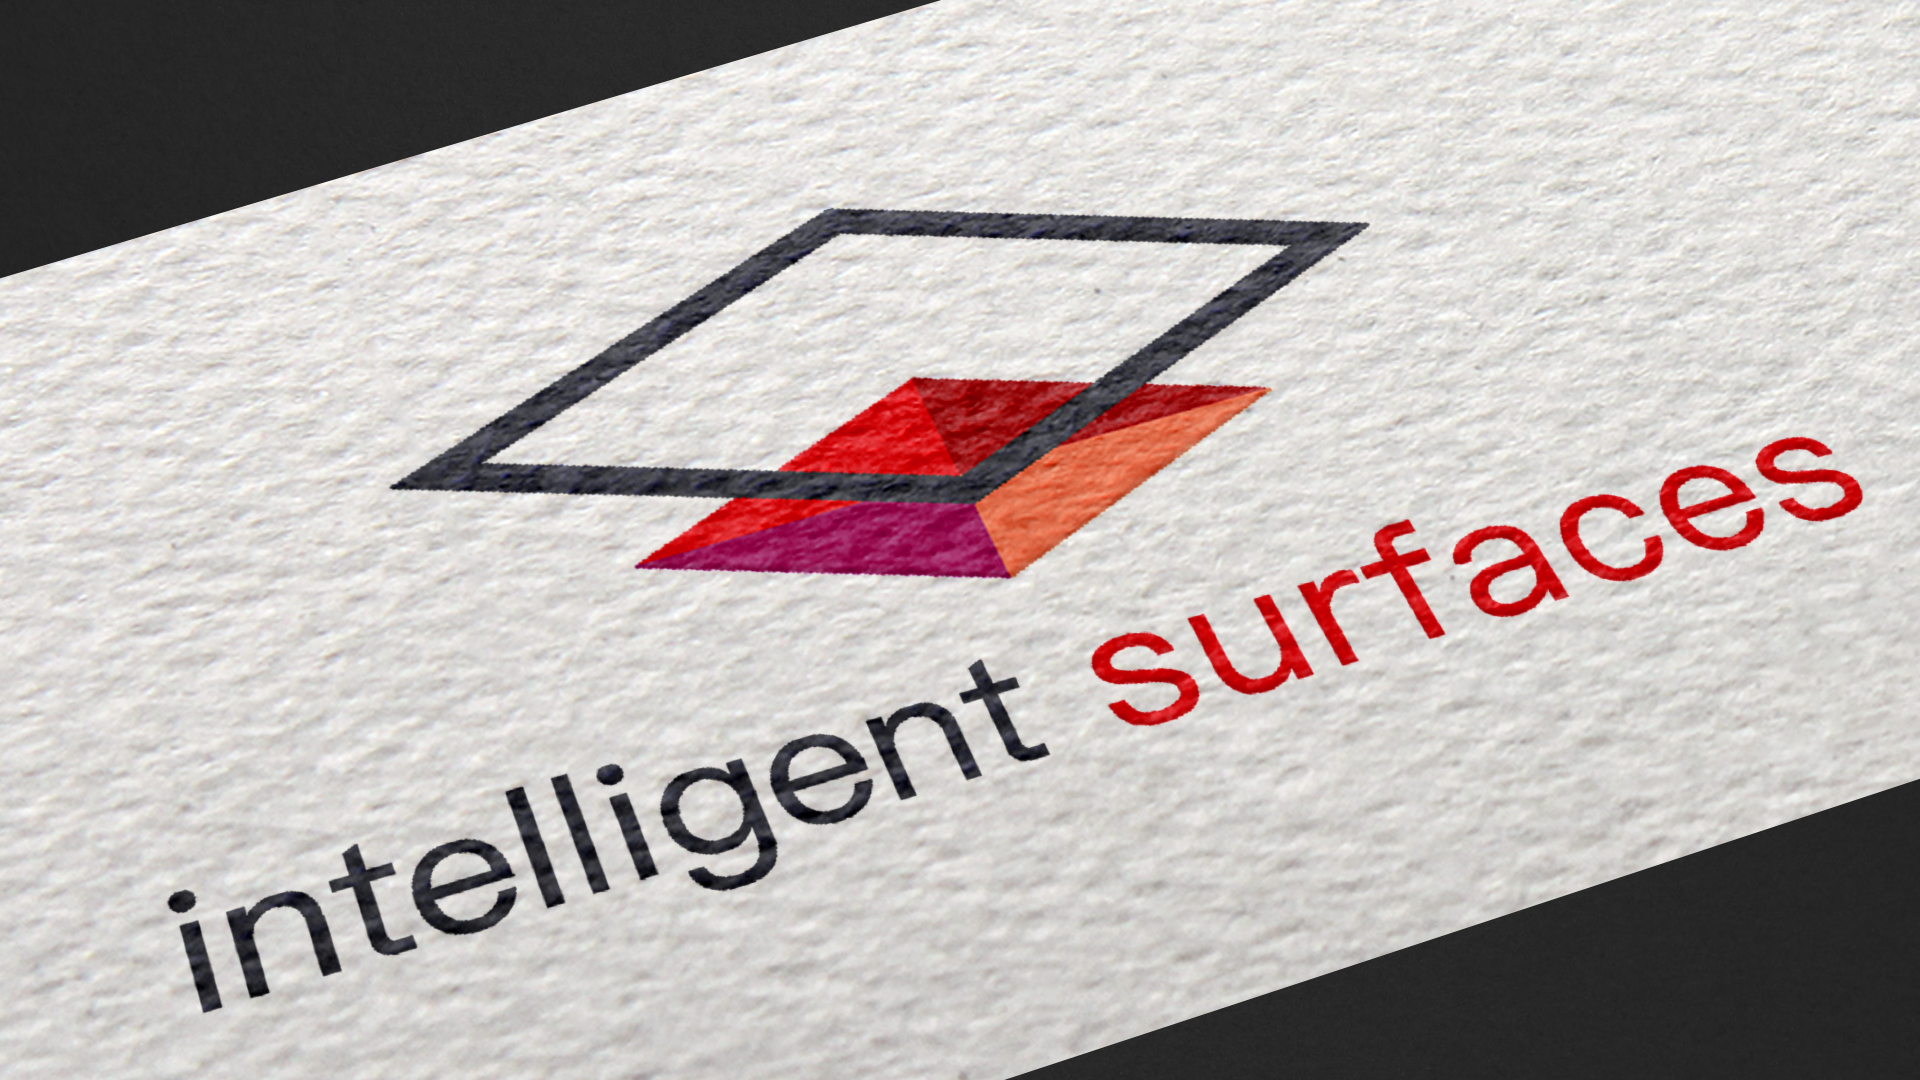 This image displays Intelligent Surfaces logo design by PixelUp.